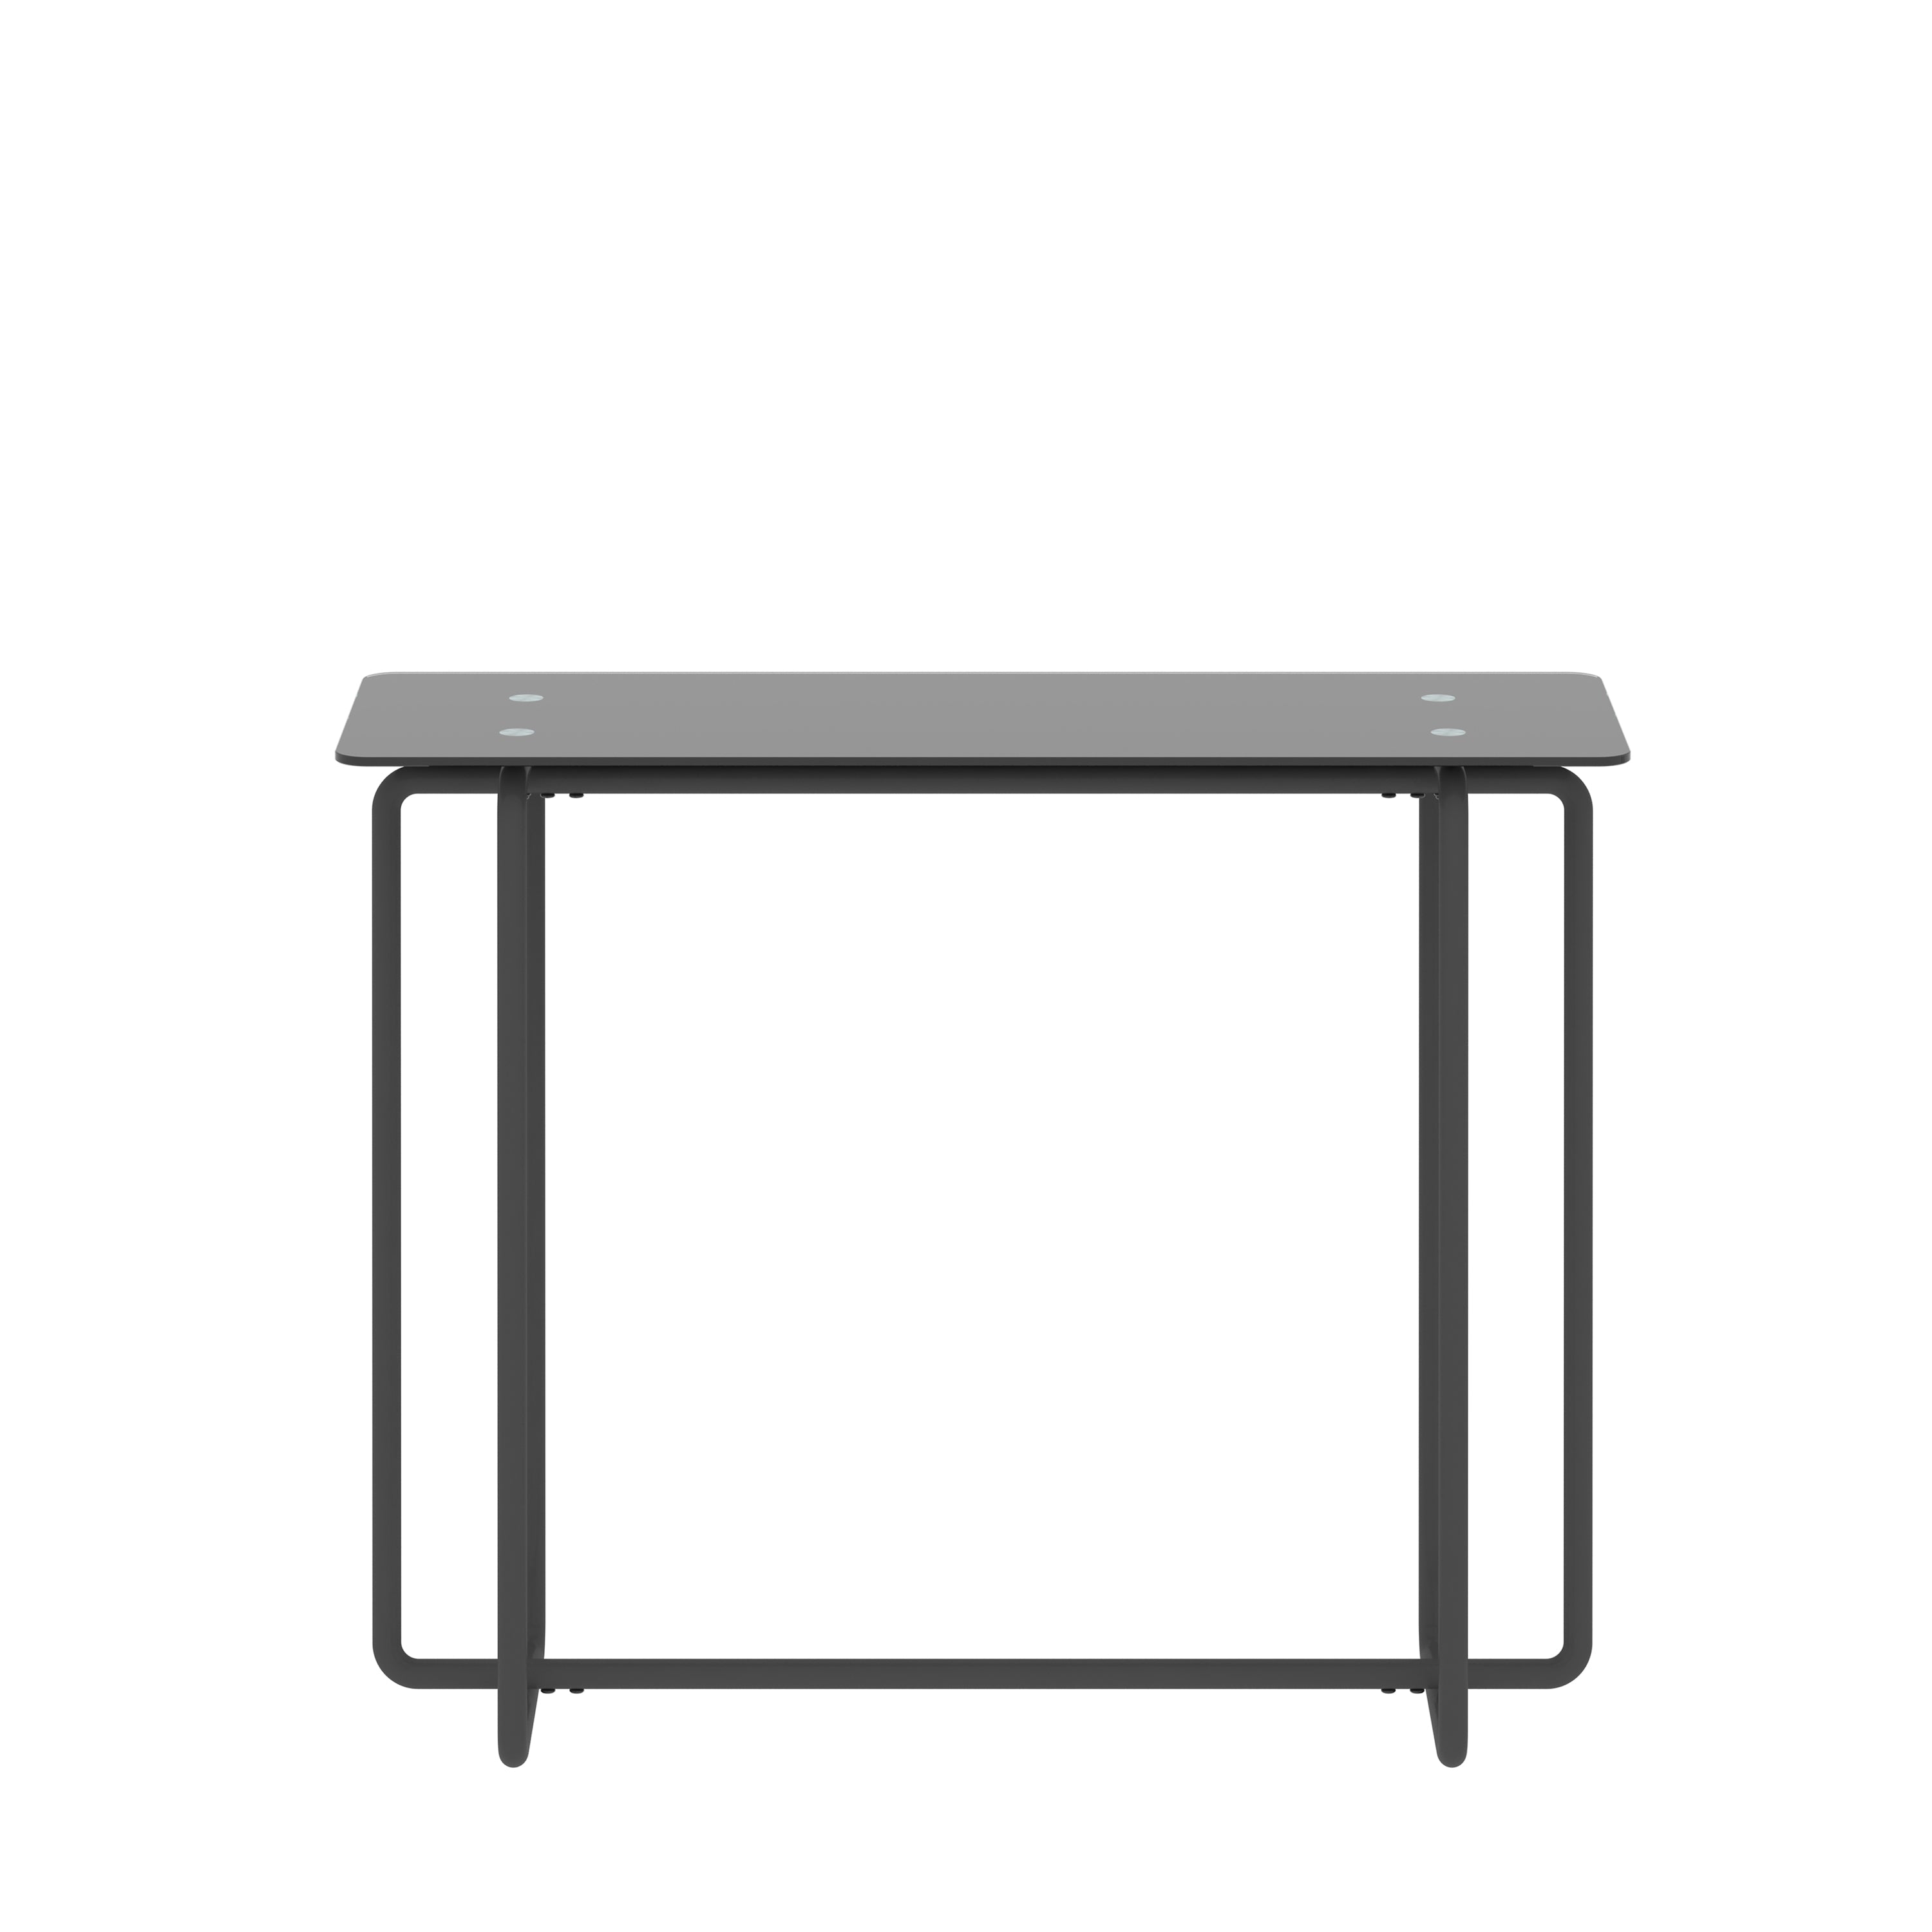 Black Tempered Glass Console Table with Black Metal Frame